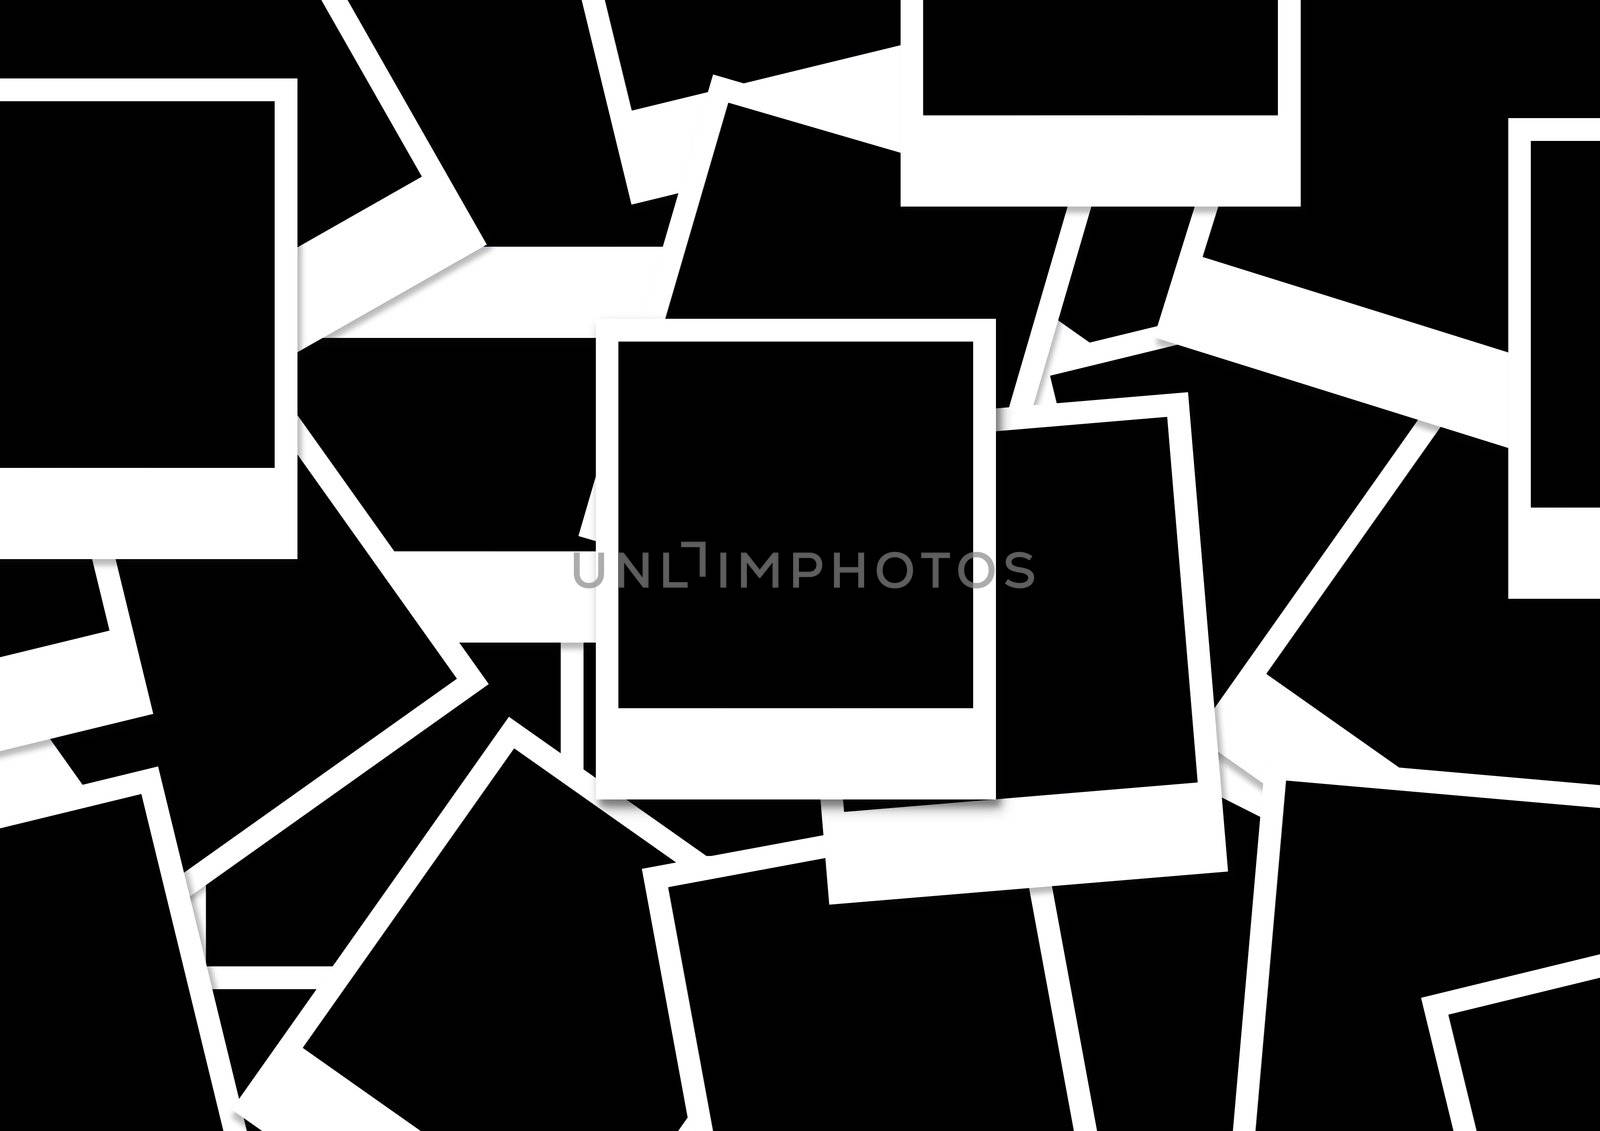 Illustration of instant Photos scattered and layered